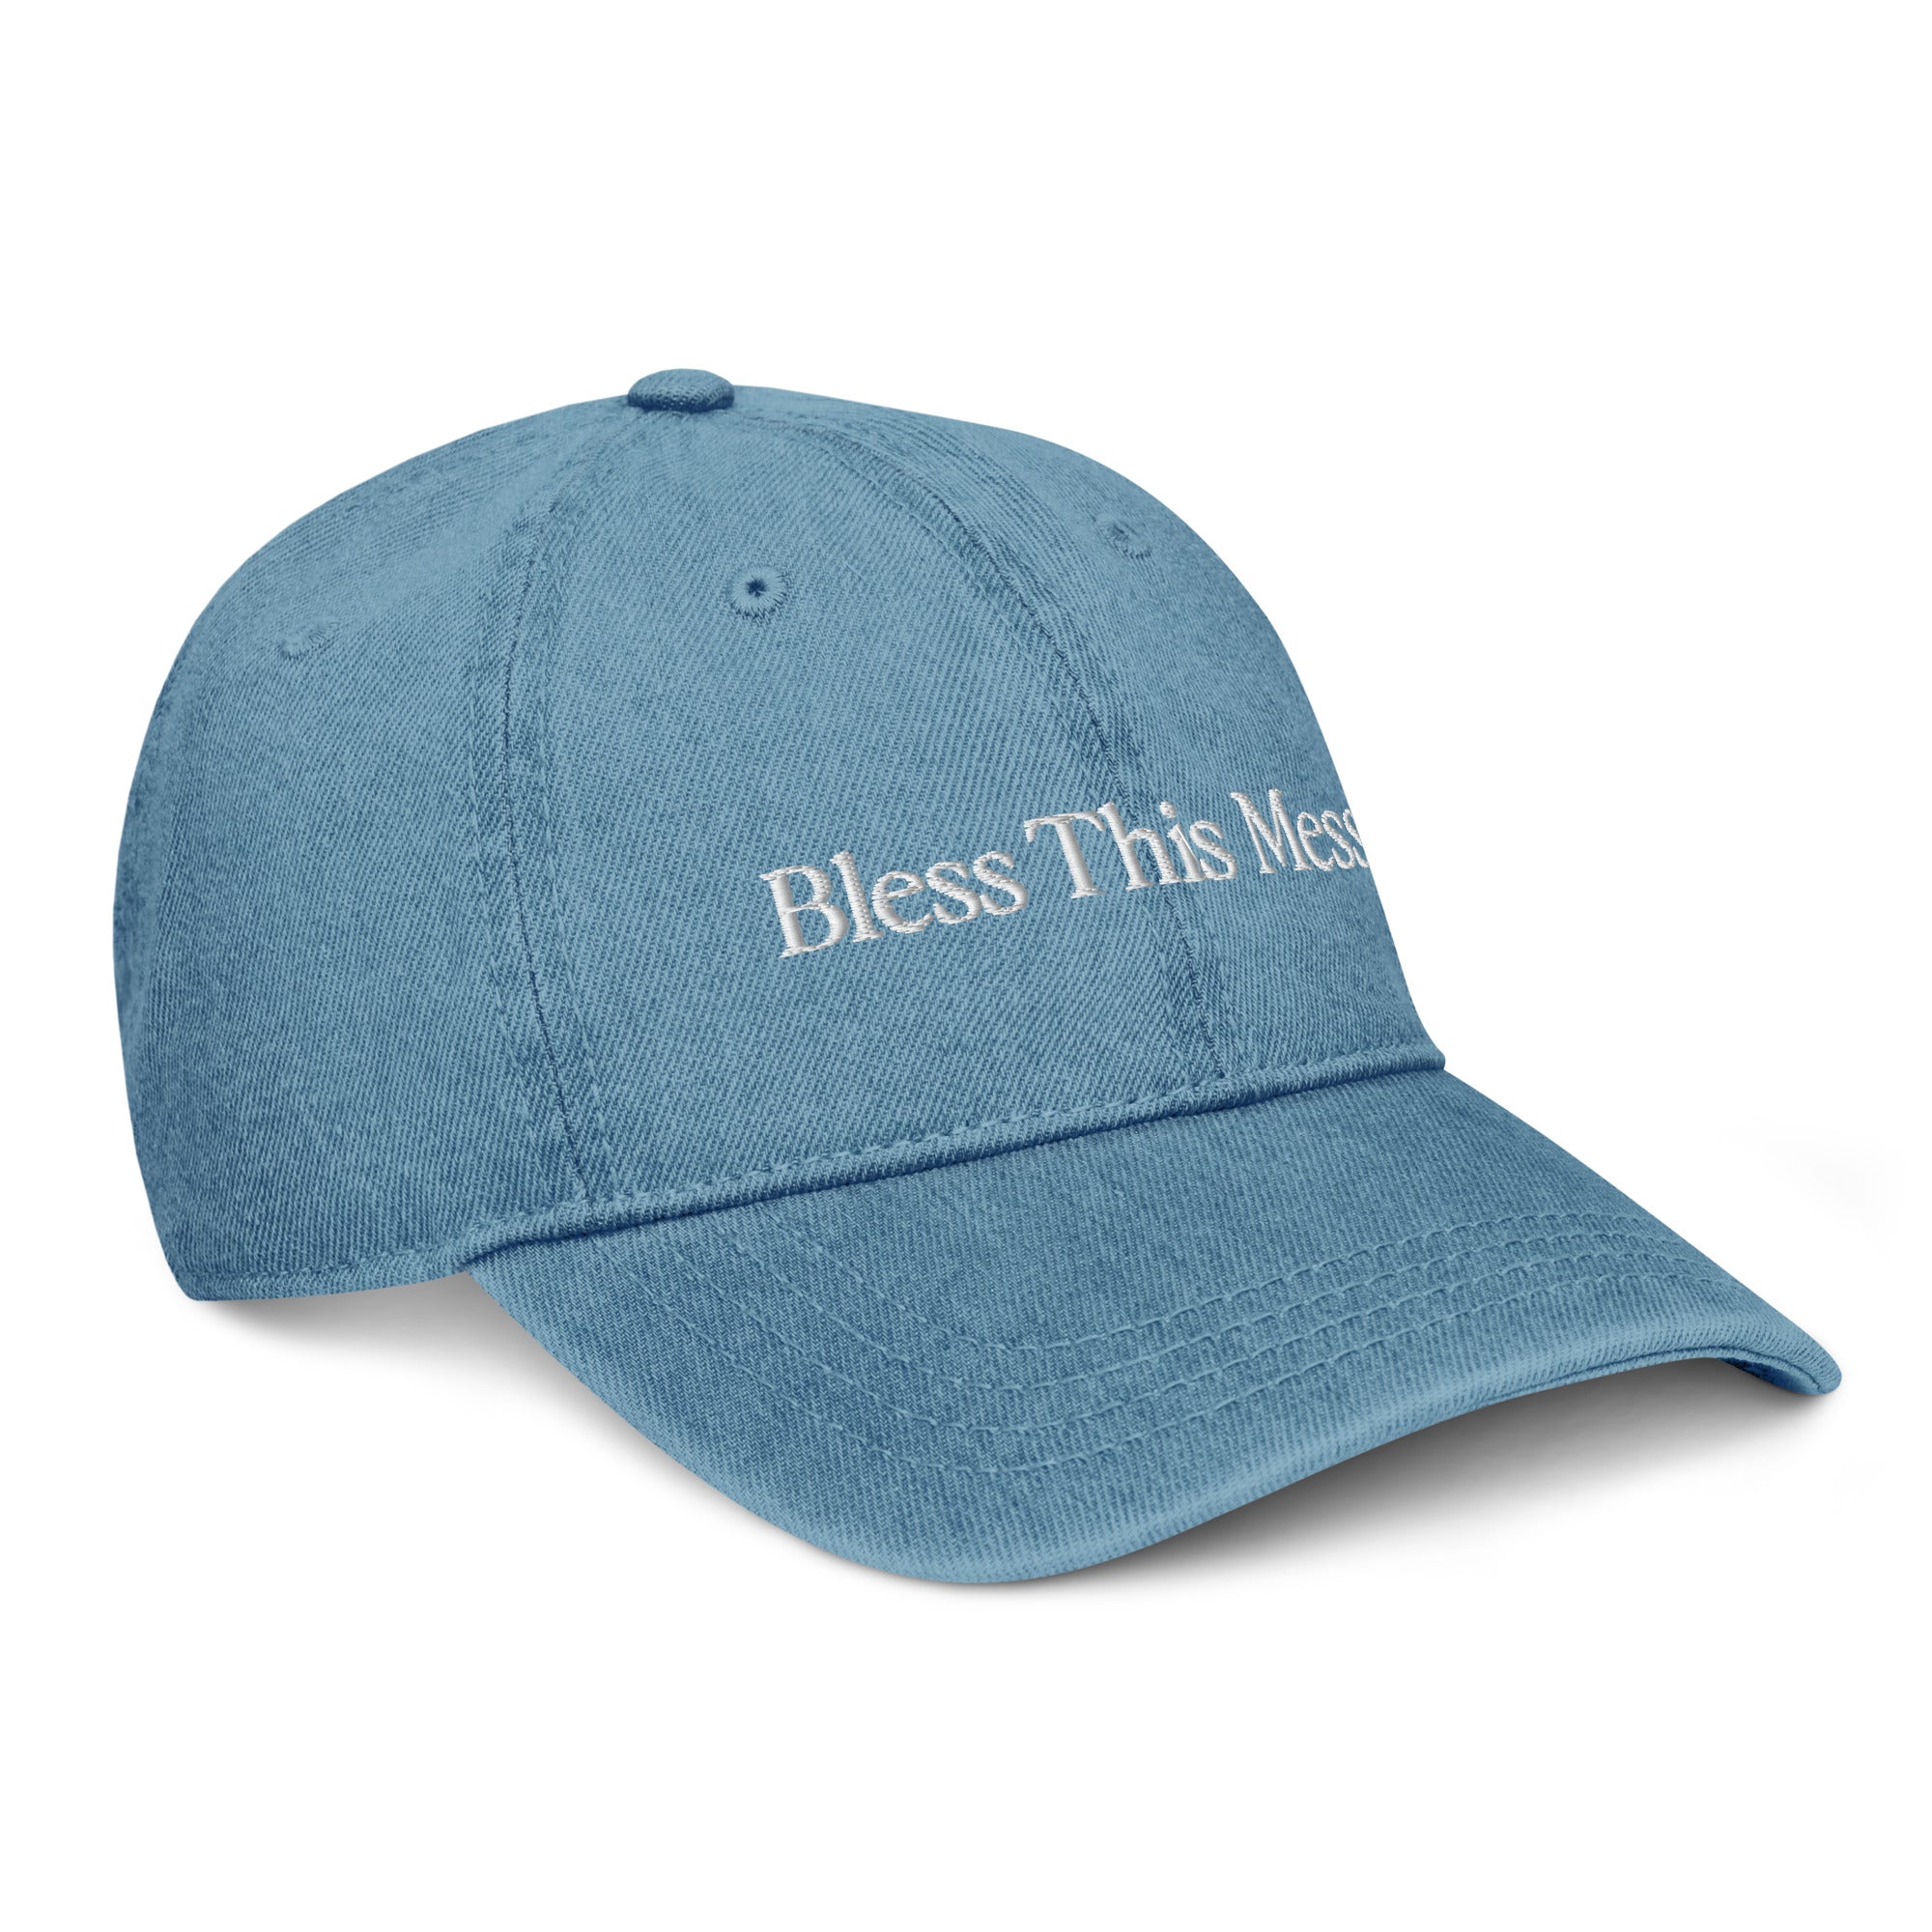 &#39;Bless This Mess&#39; Denim Dad Hat